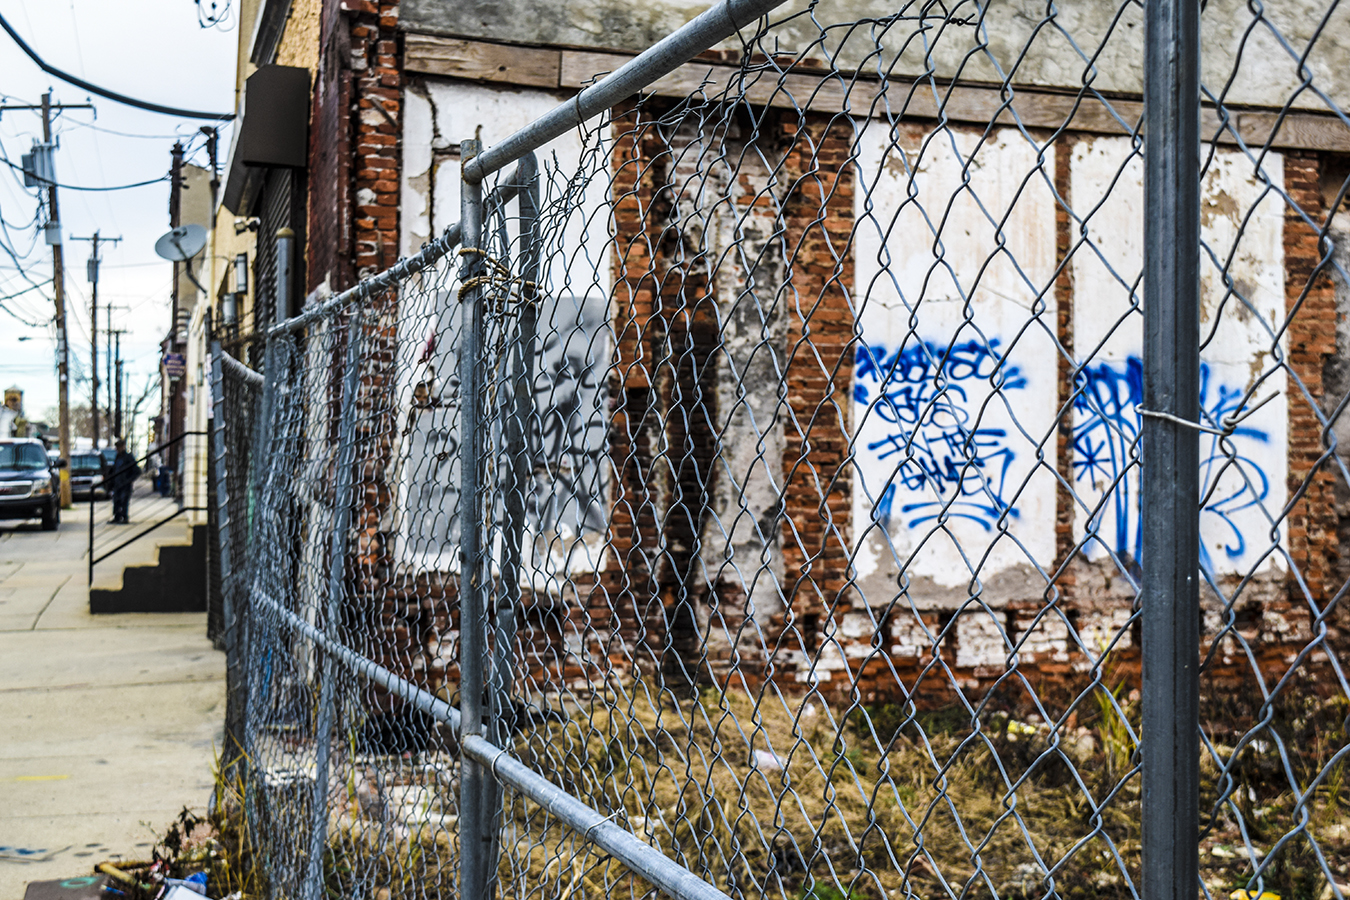 Victoria_Meng_West_Philadelphia_Lot_Empty_Graffiti_Chain_Link_Fence_Brick_Abandoned_Philly